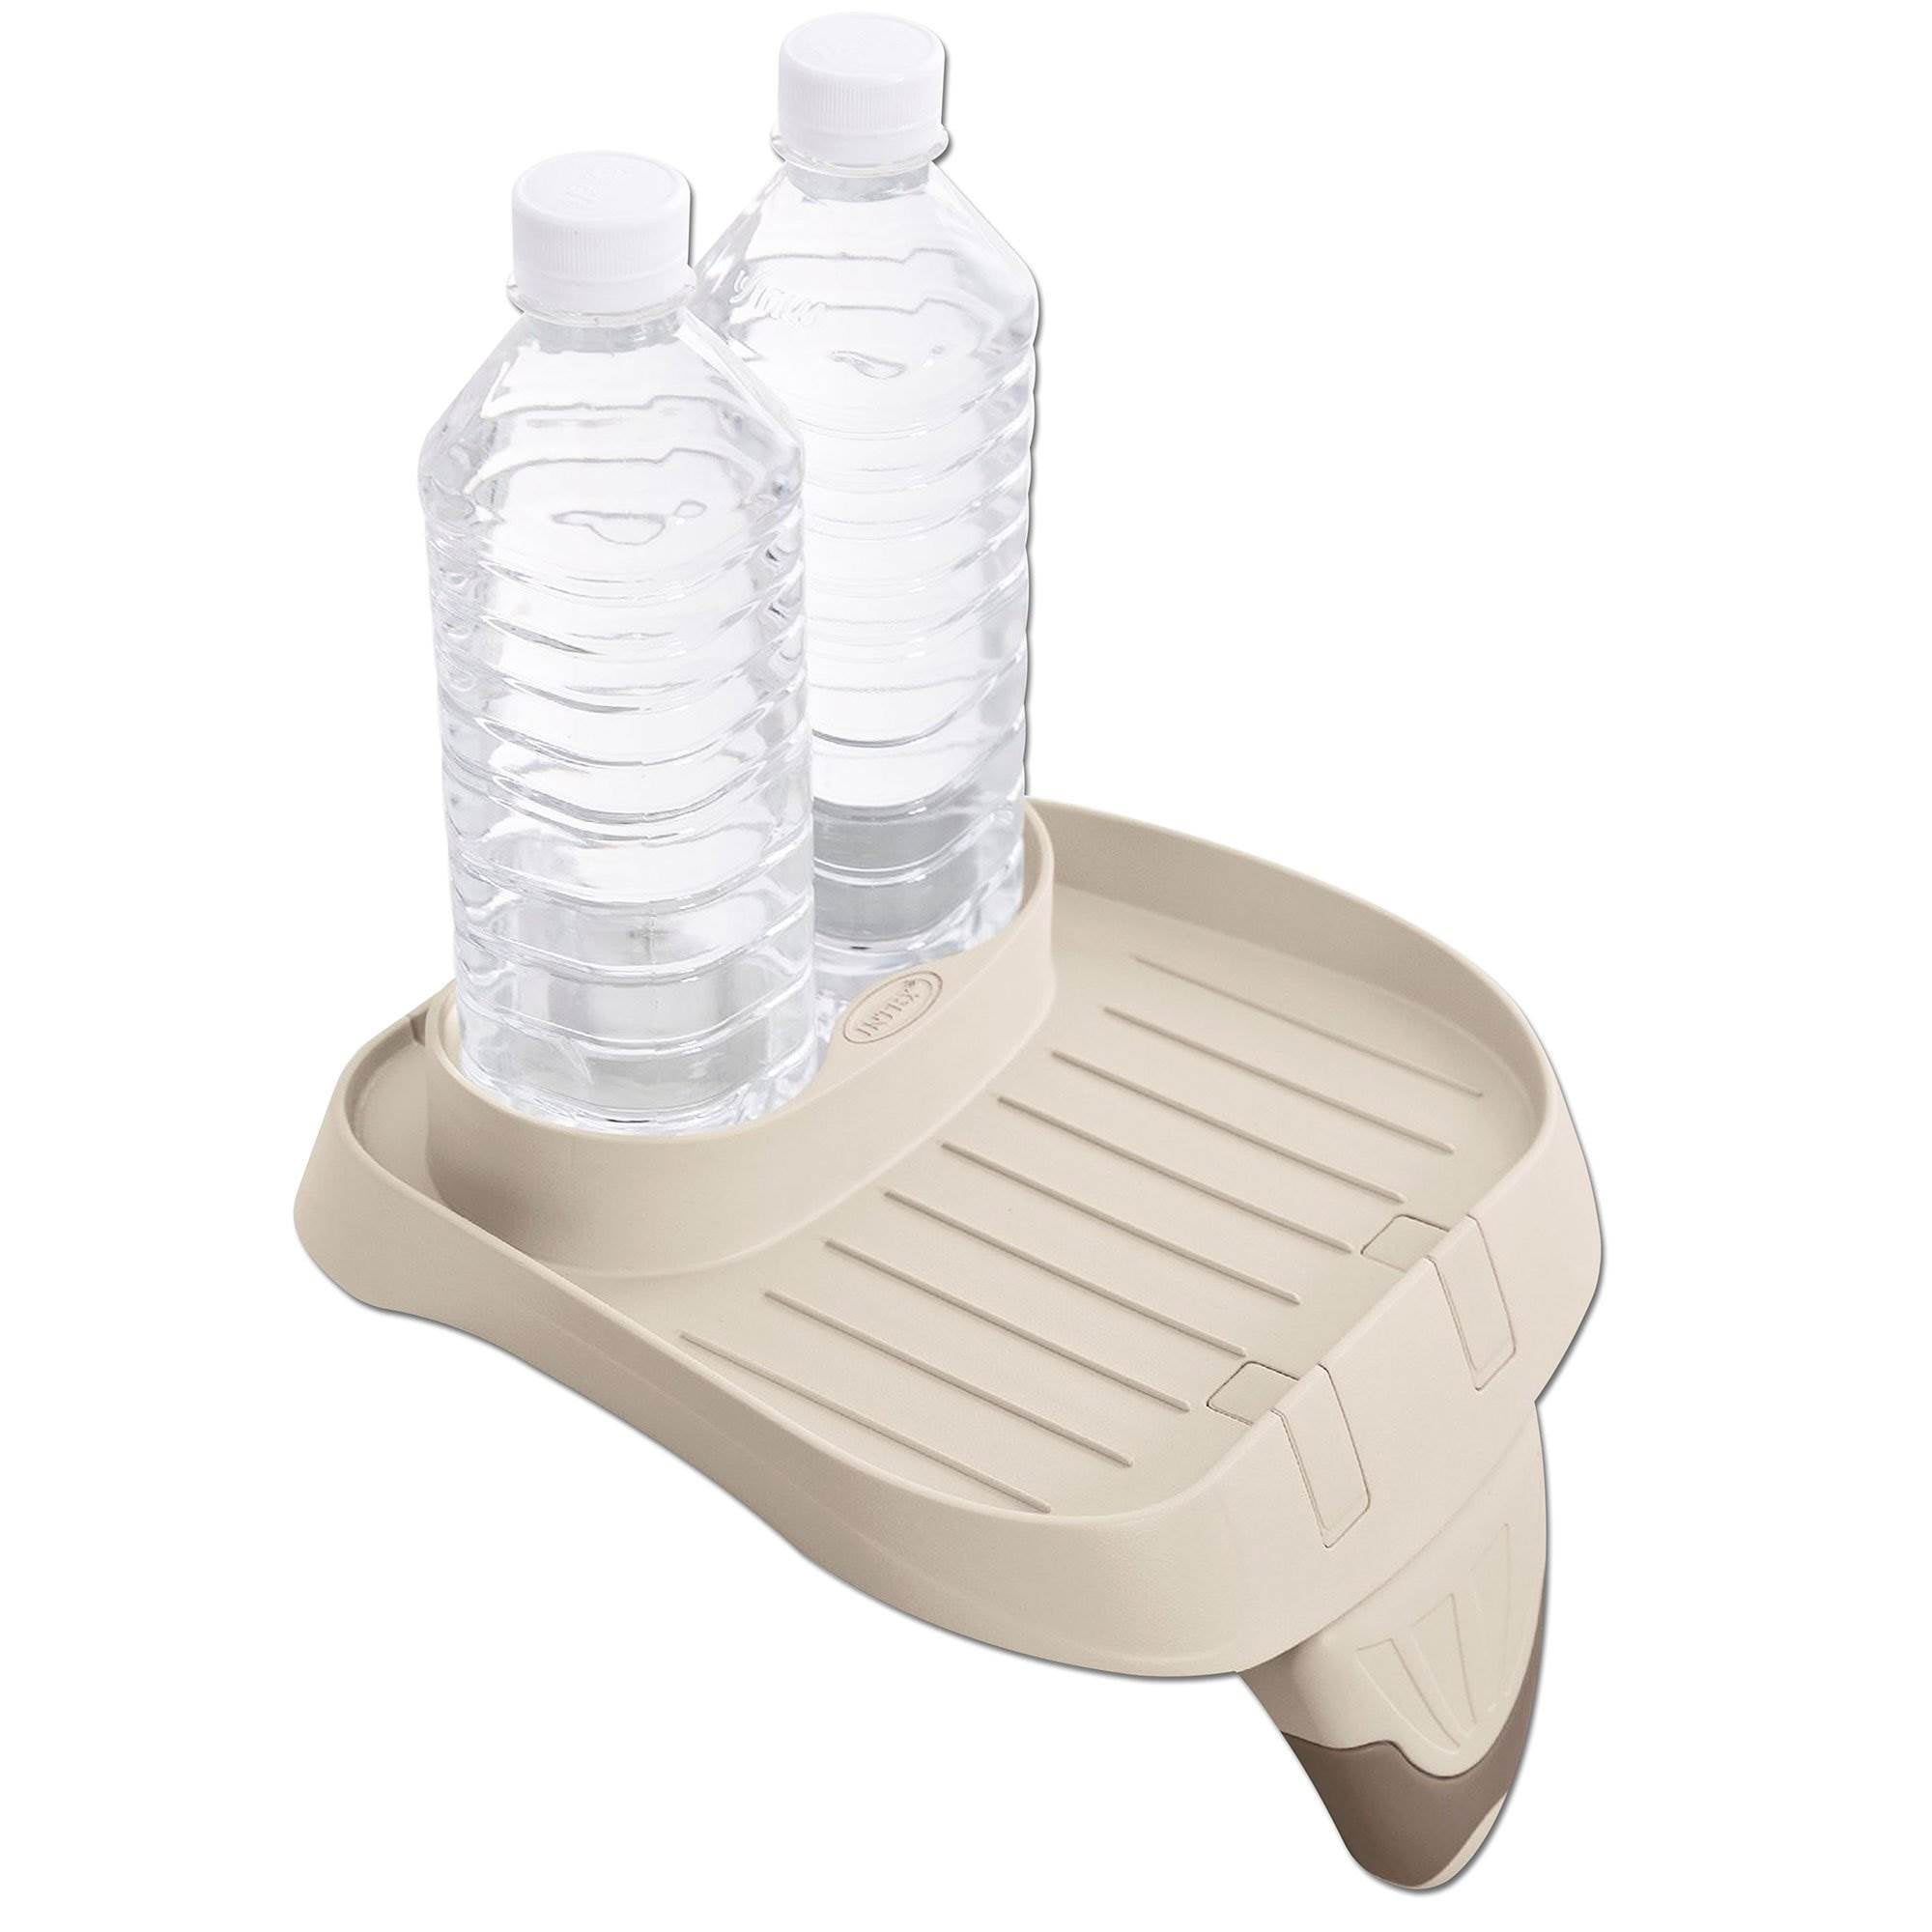 Hot Tub Lazy Z-Spa Drink Holder Hot Drinks Food Drink Snack Holder Tray Stand 